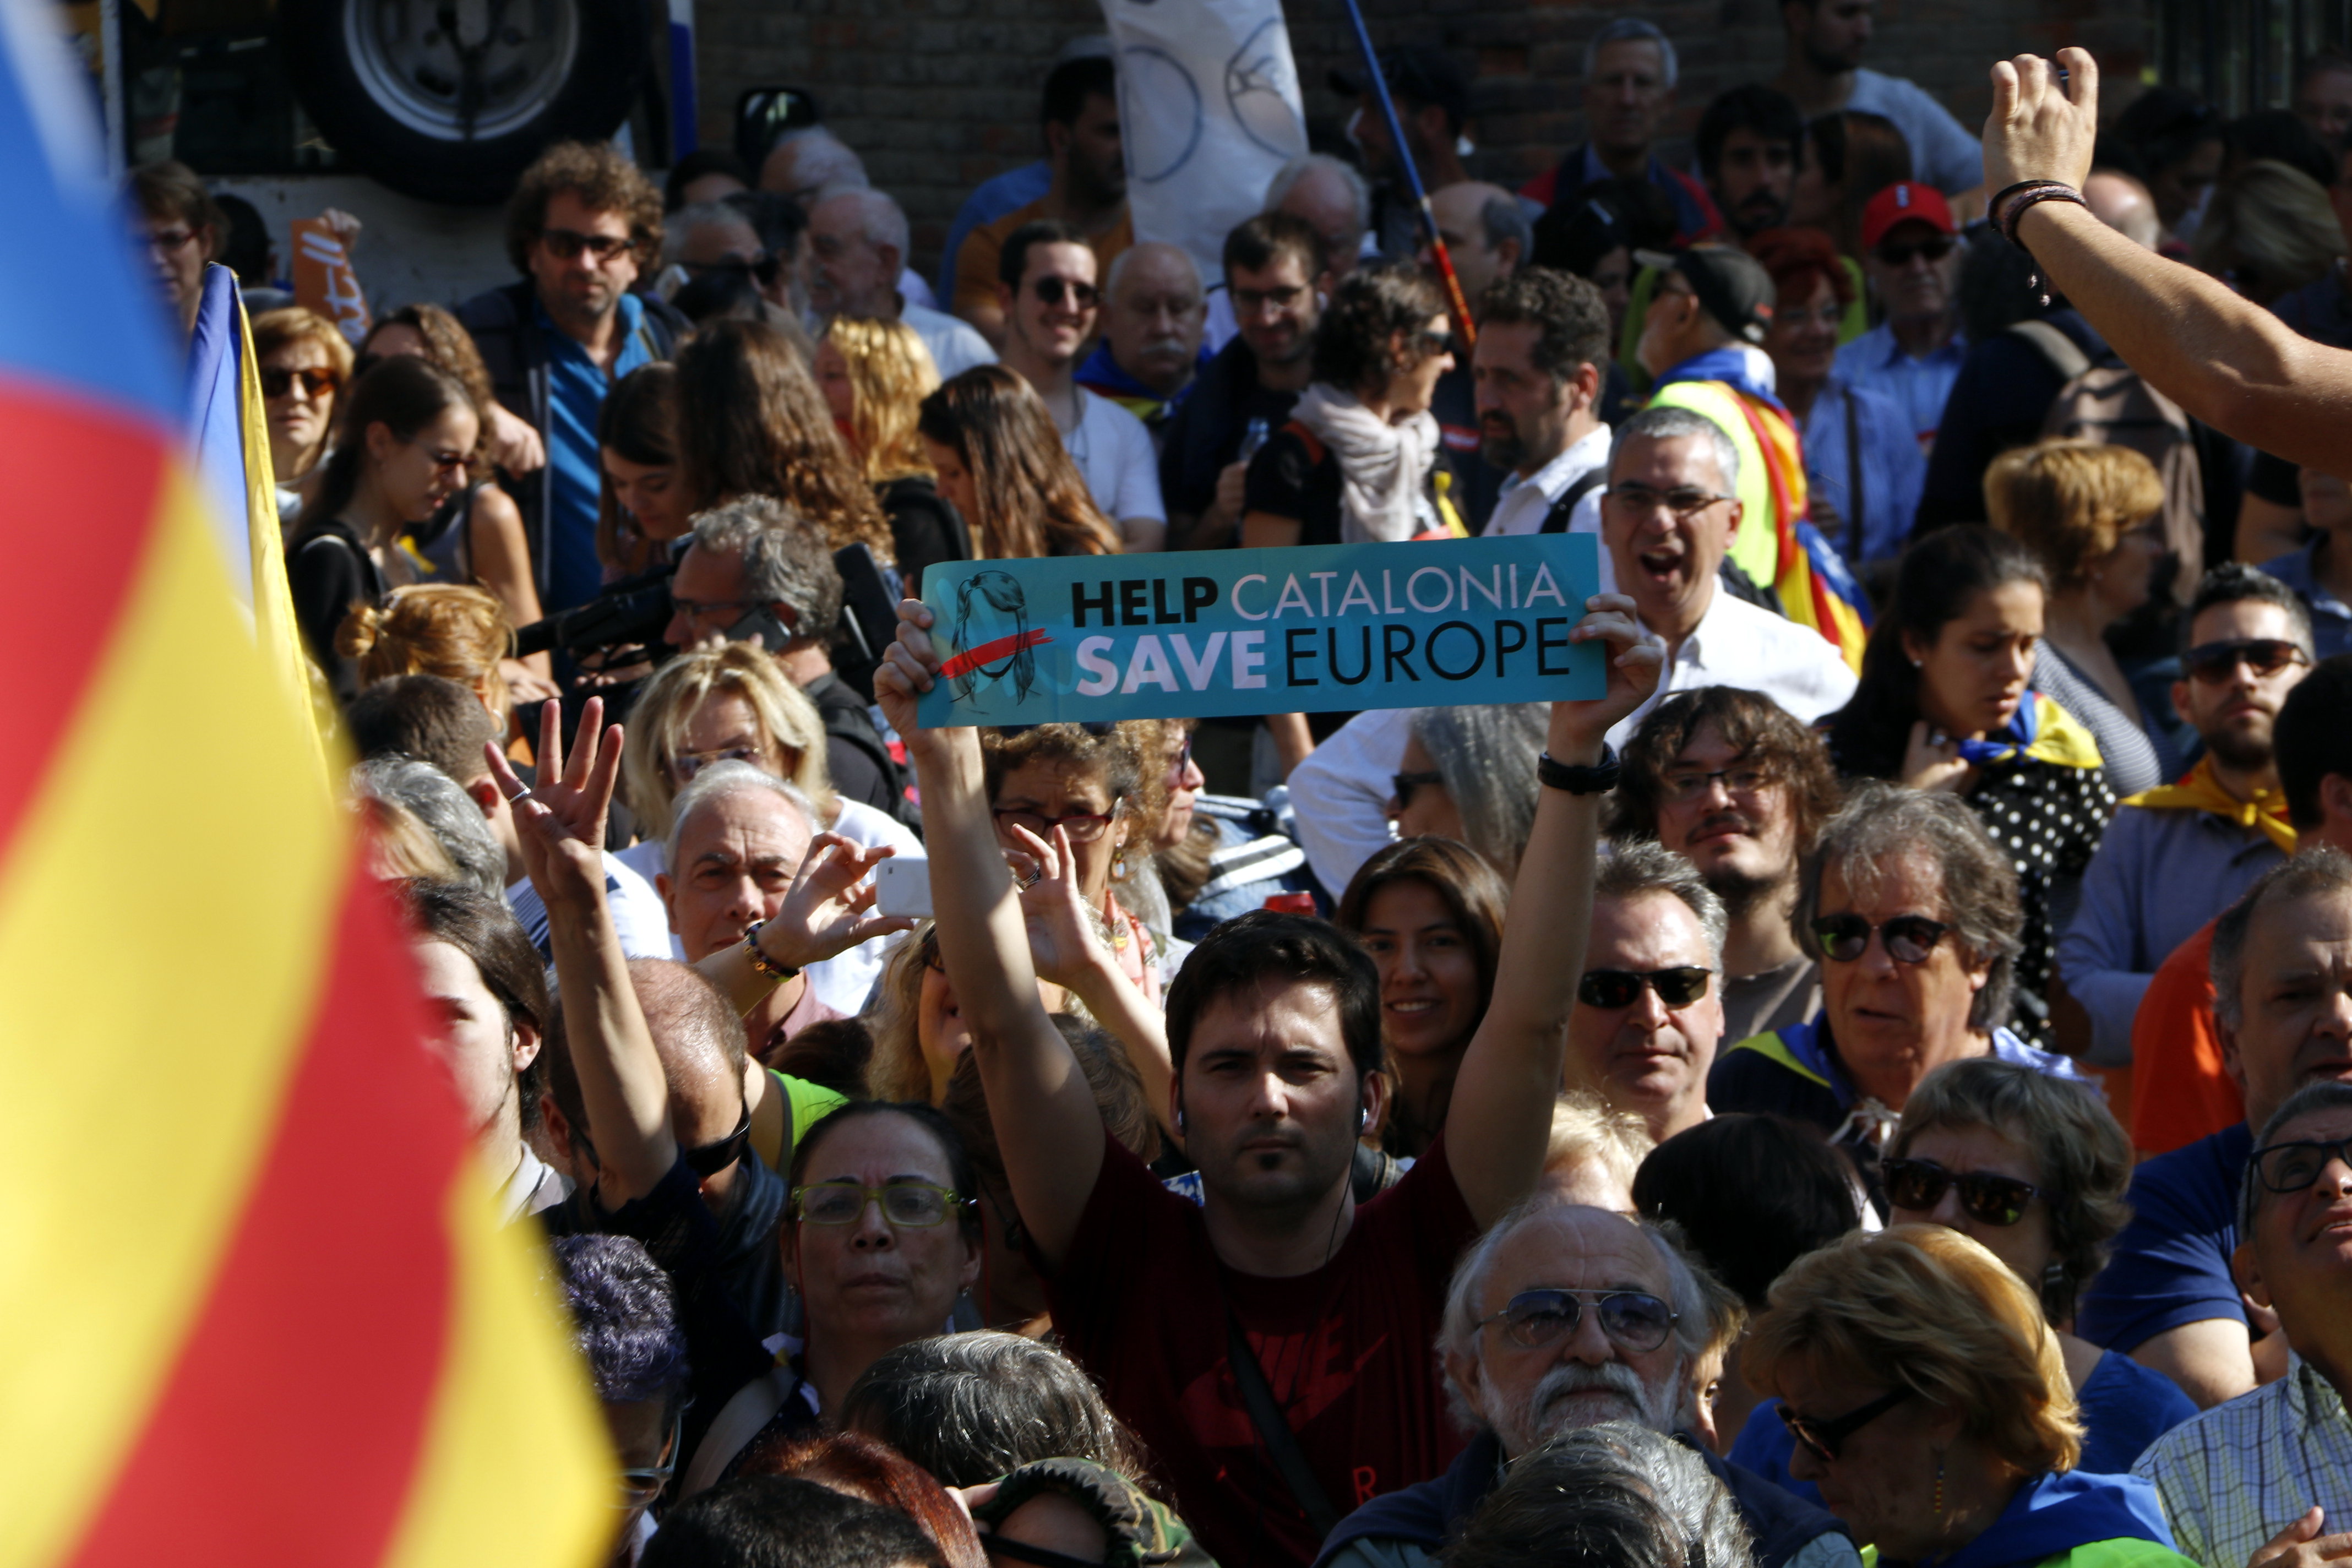 Demonstrator holding a sign that reads “Help Catalonia. Save Europe! (by Laura Busquets)